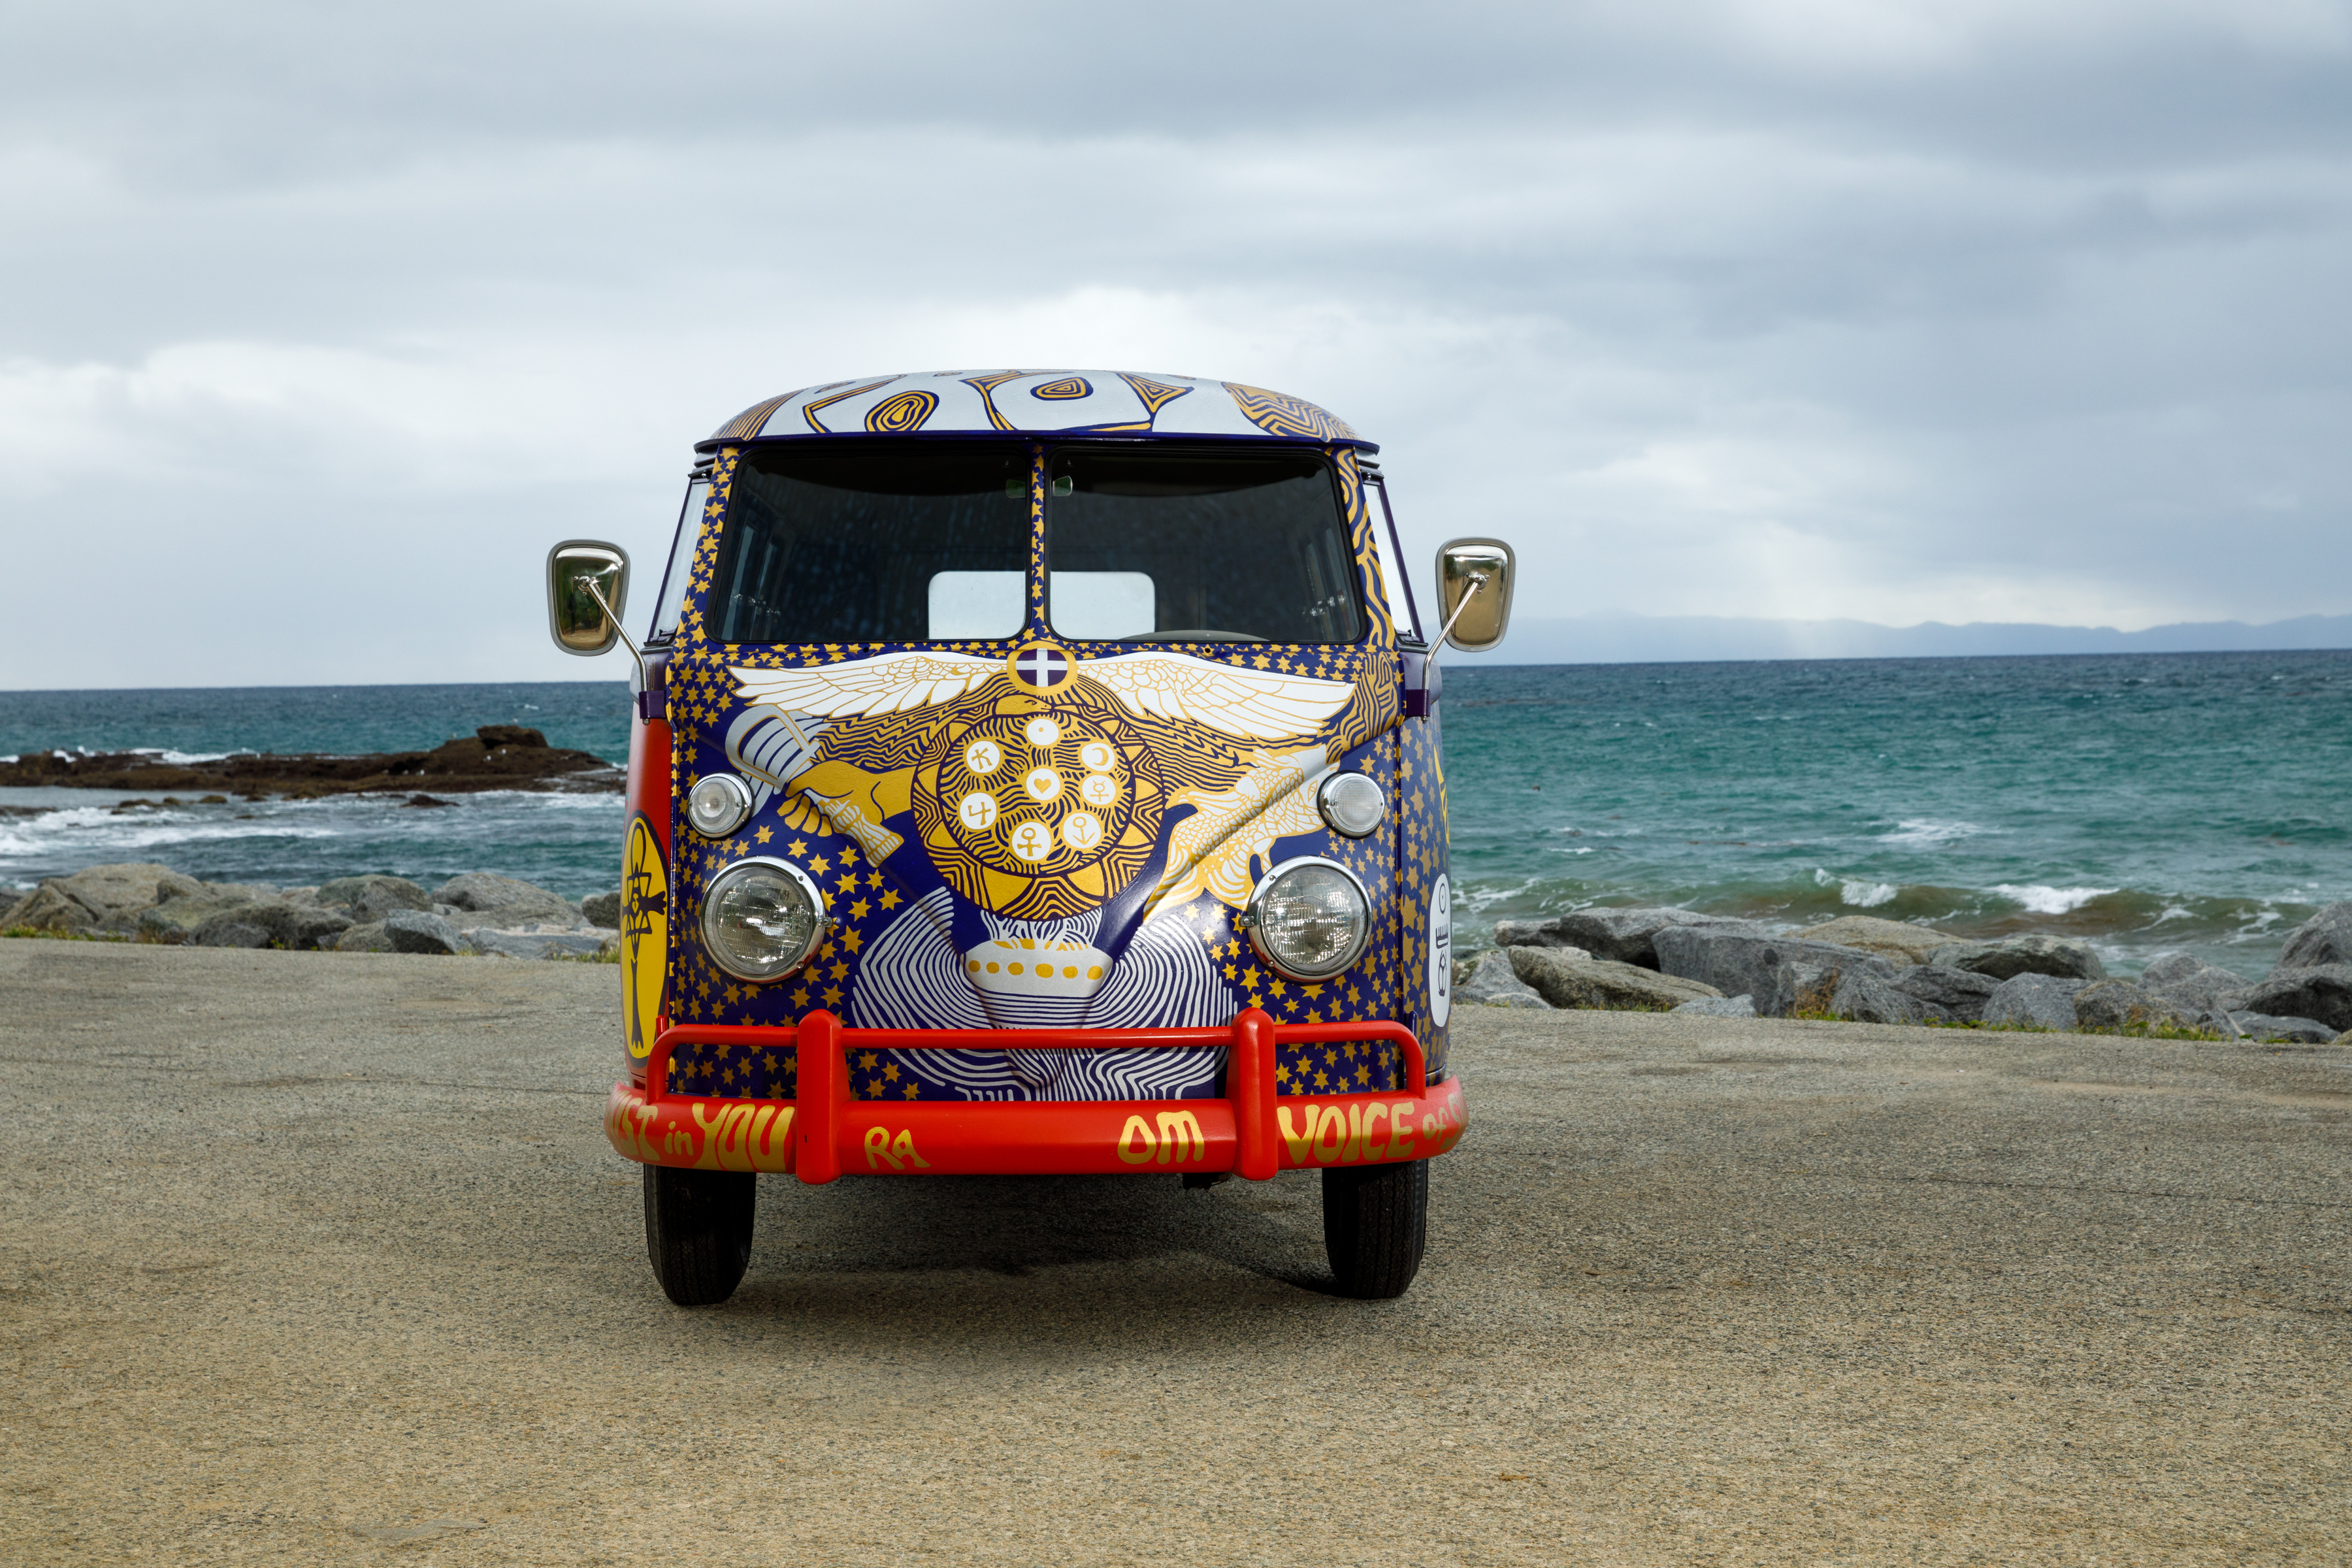 A recreation of the legendary “Light” bus that gained recognition after its appearance at the 1969 Woodstock Art and Music Fair. (Volkswagen)